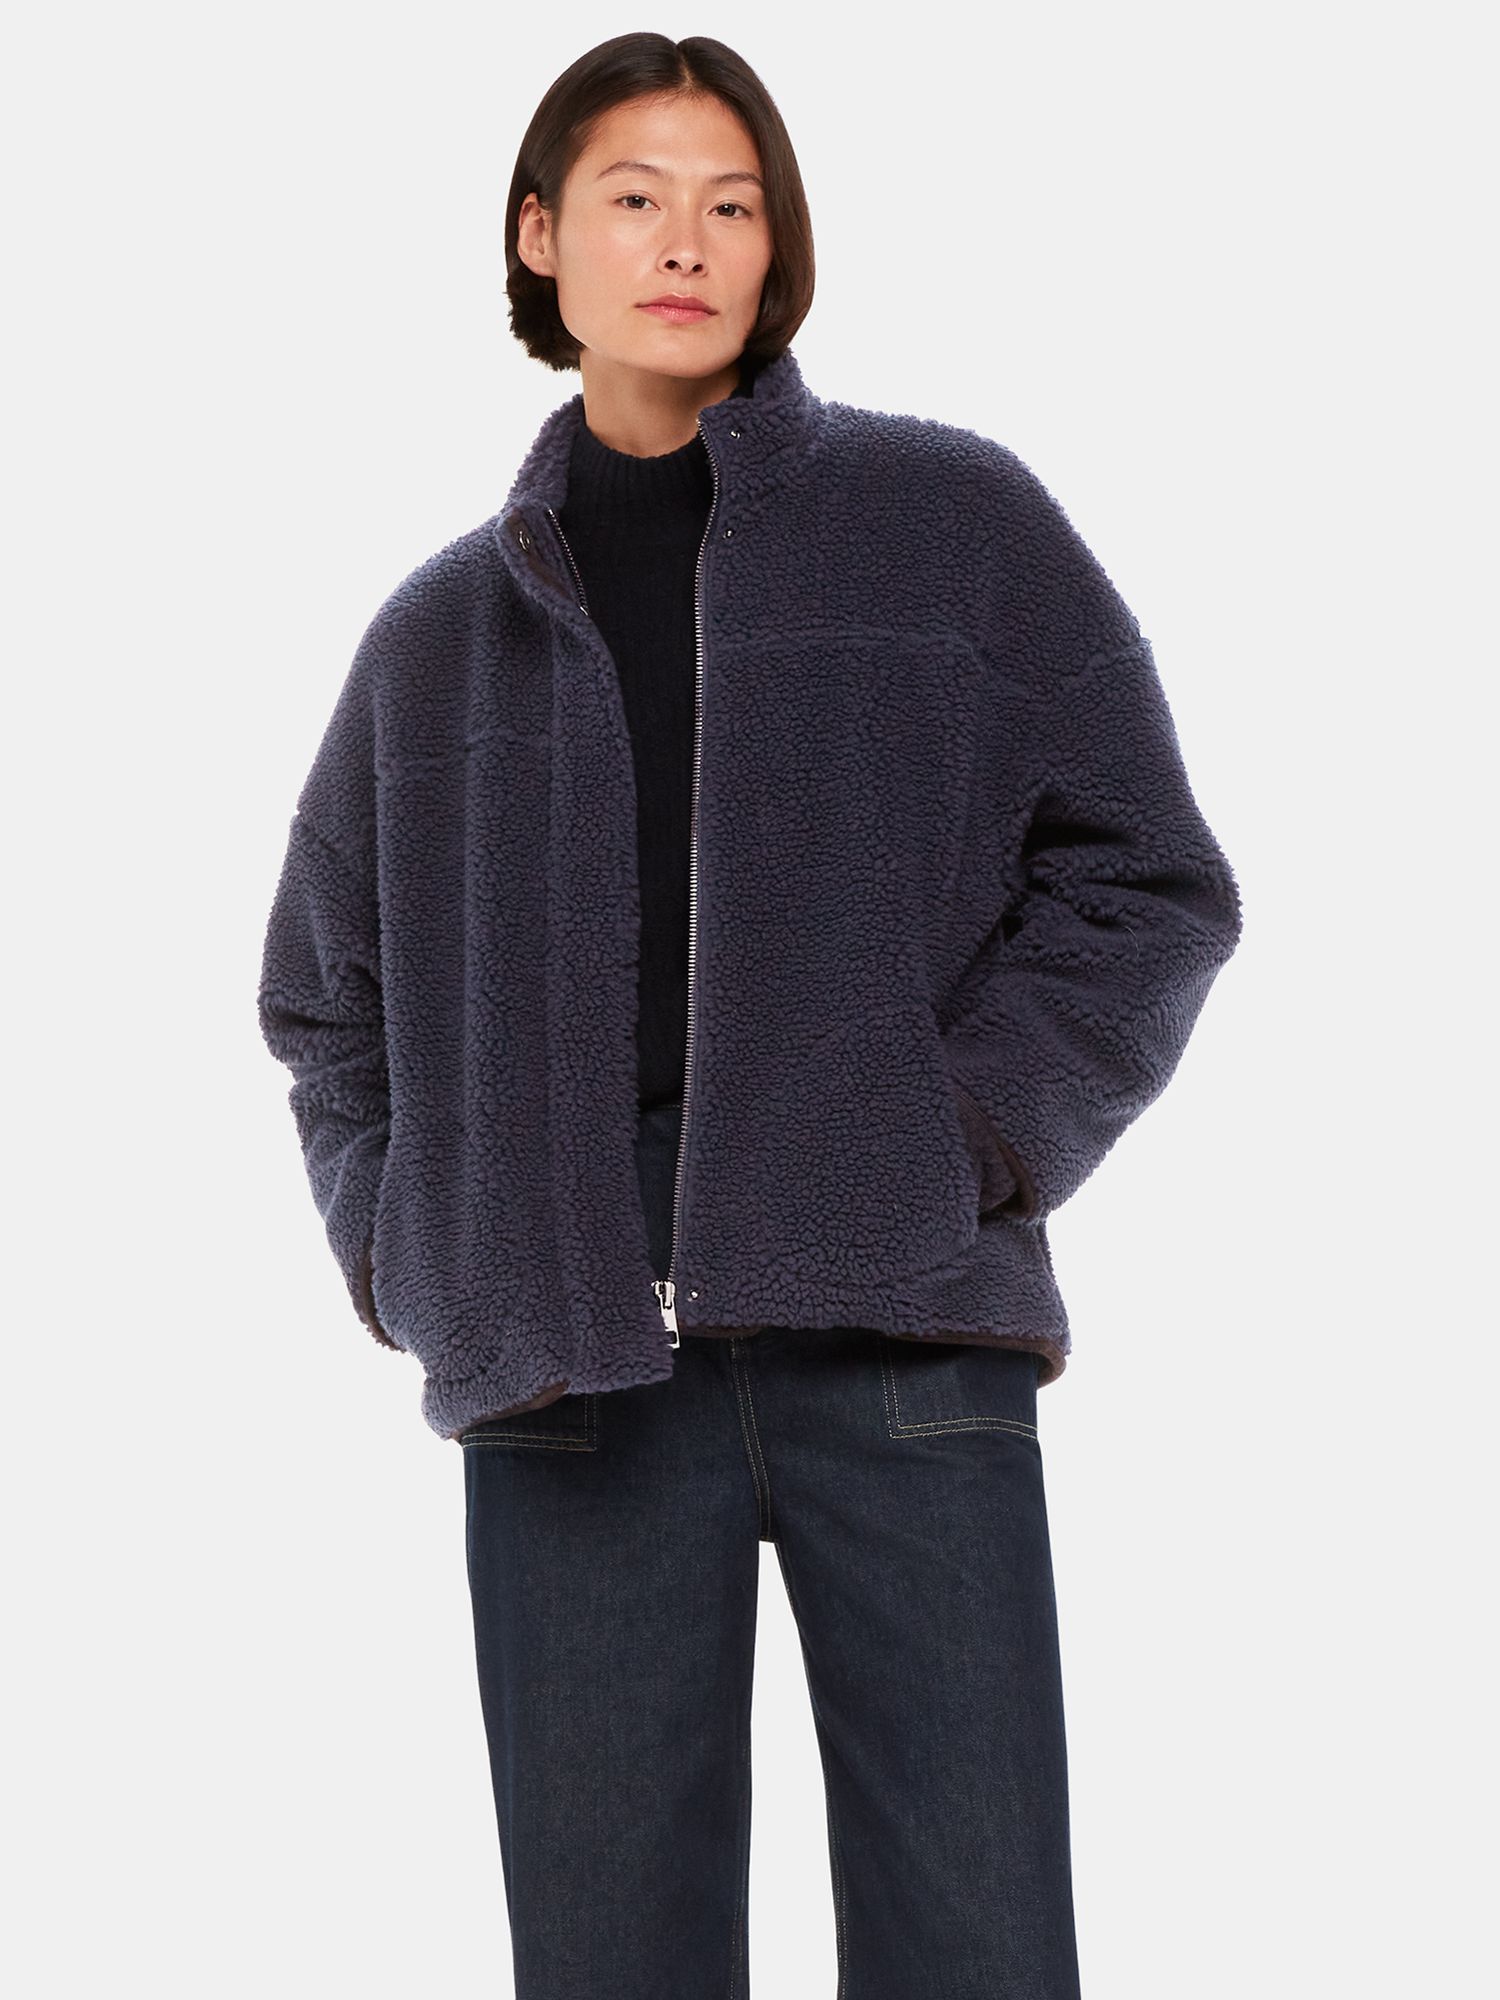 Whistles Faux Teddy Bomber Jacket, Navy at John Lewis & Partners